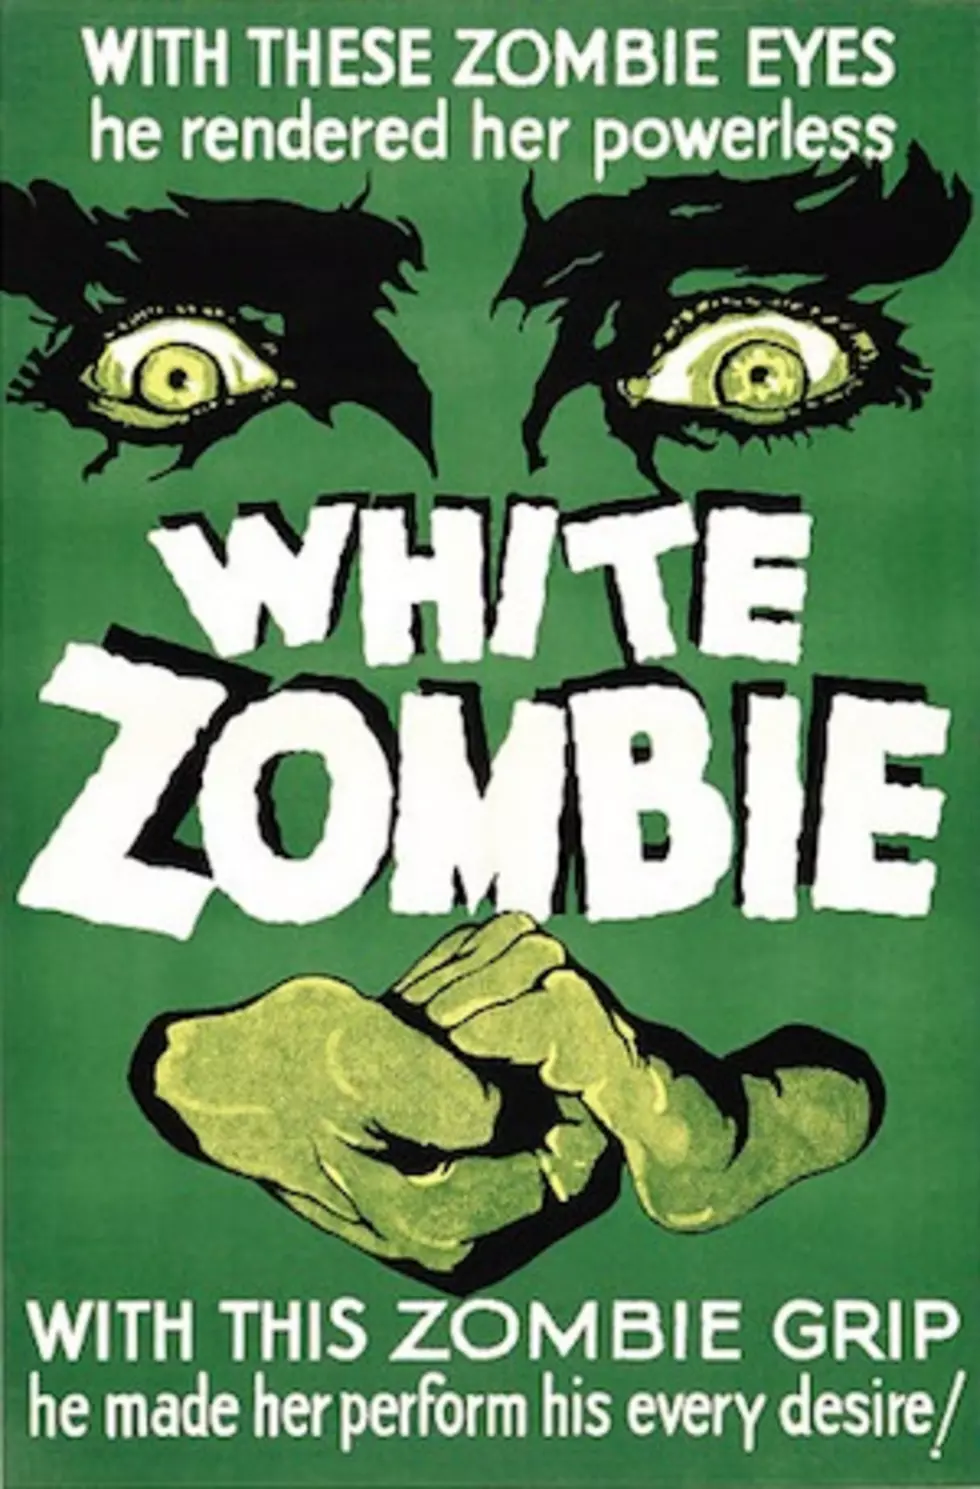 &#8216;White Zombie&#8217; &#8211; 7 Horror Movies That Inspired Band Names